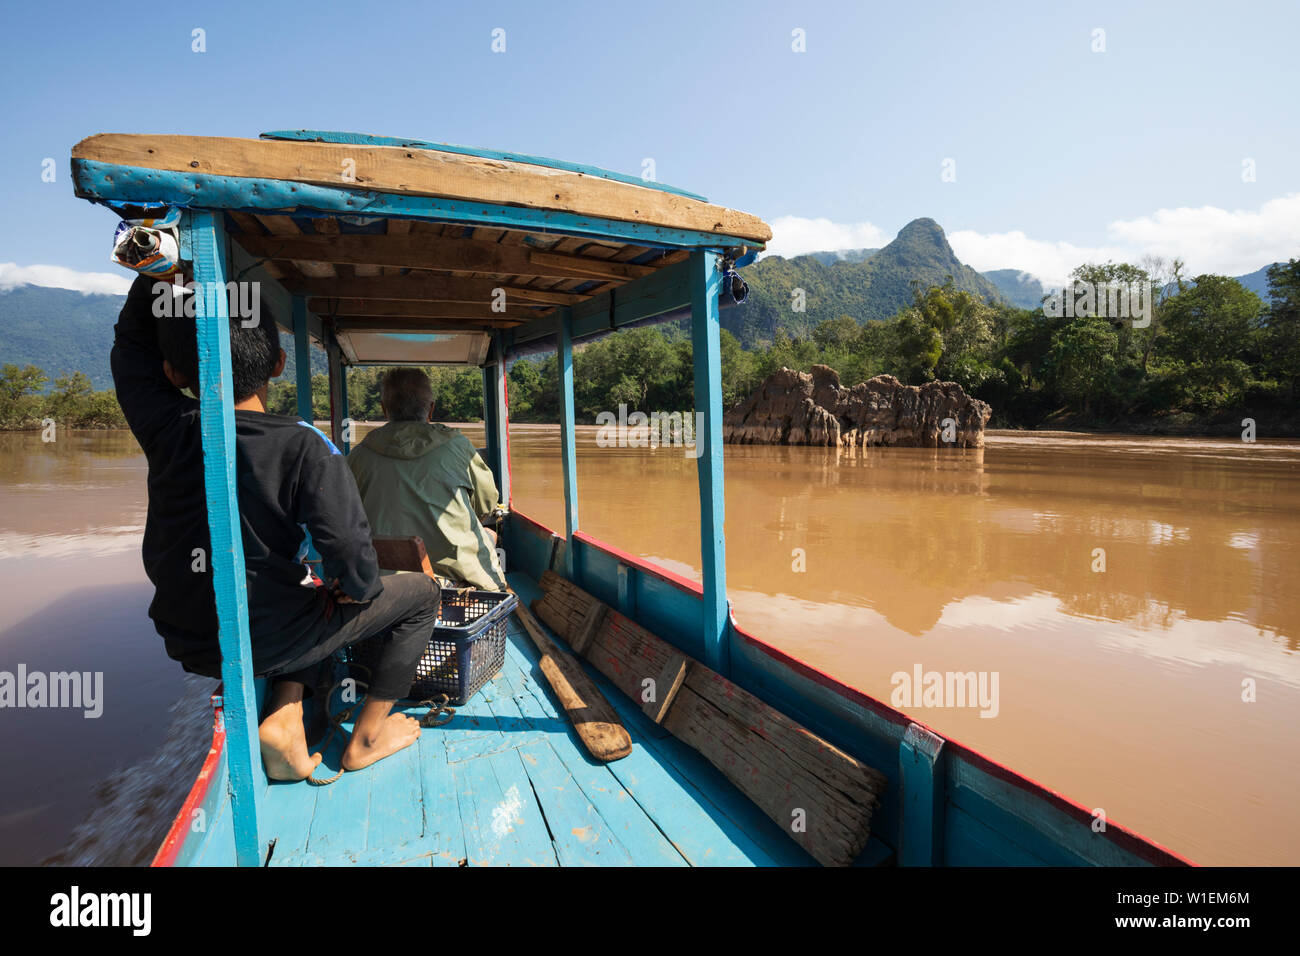 Boat trip on the Nam Ou River near Nong Khiaw, Muang Ngoi District, Luang Prabang Province, Northern Laos, Laos, Indochina, Southeast Asia, Asia Stock Photo